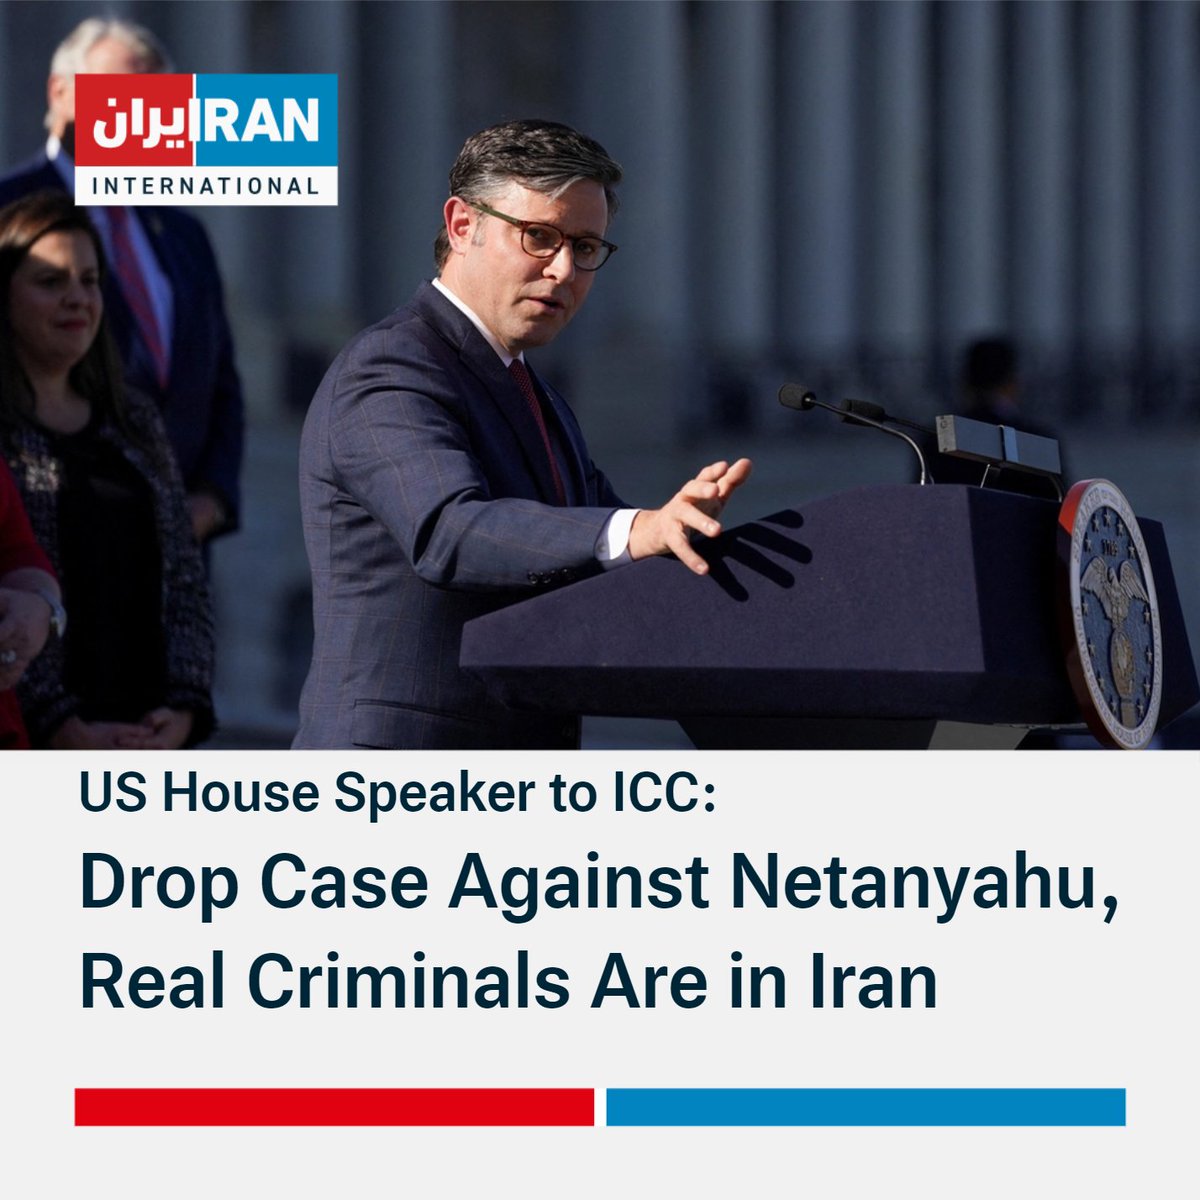 US House @SpeakerJohnson on concerns that ICC may issue arrest warrant for @netanyahu: 'Note to the ICC: the real criminals are with Hamas and in Iran... The ICC should stand down on this immediately. Israel has the right to defend itself from terrorist organizations seeking to…